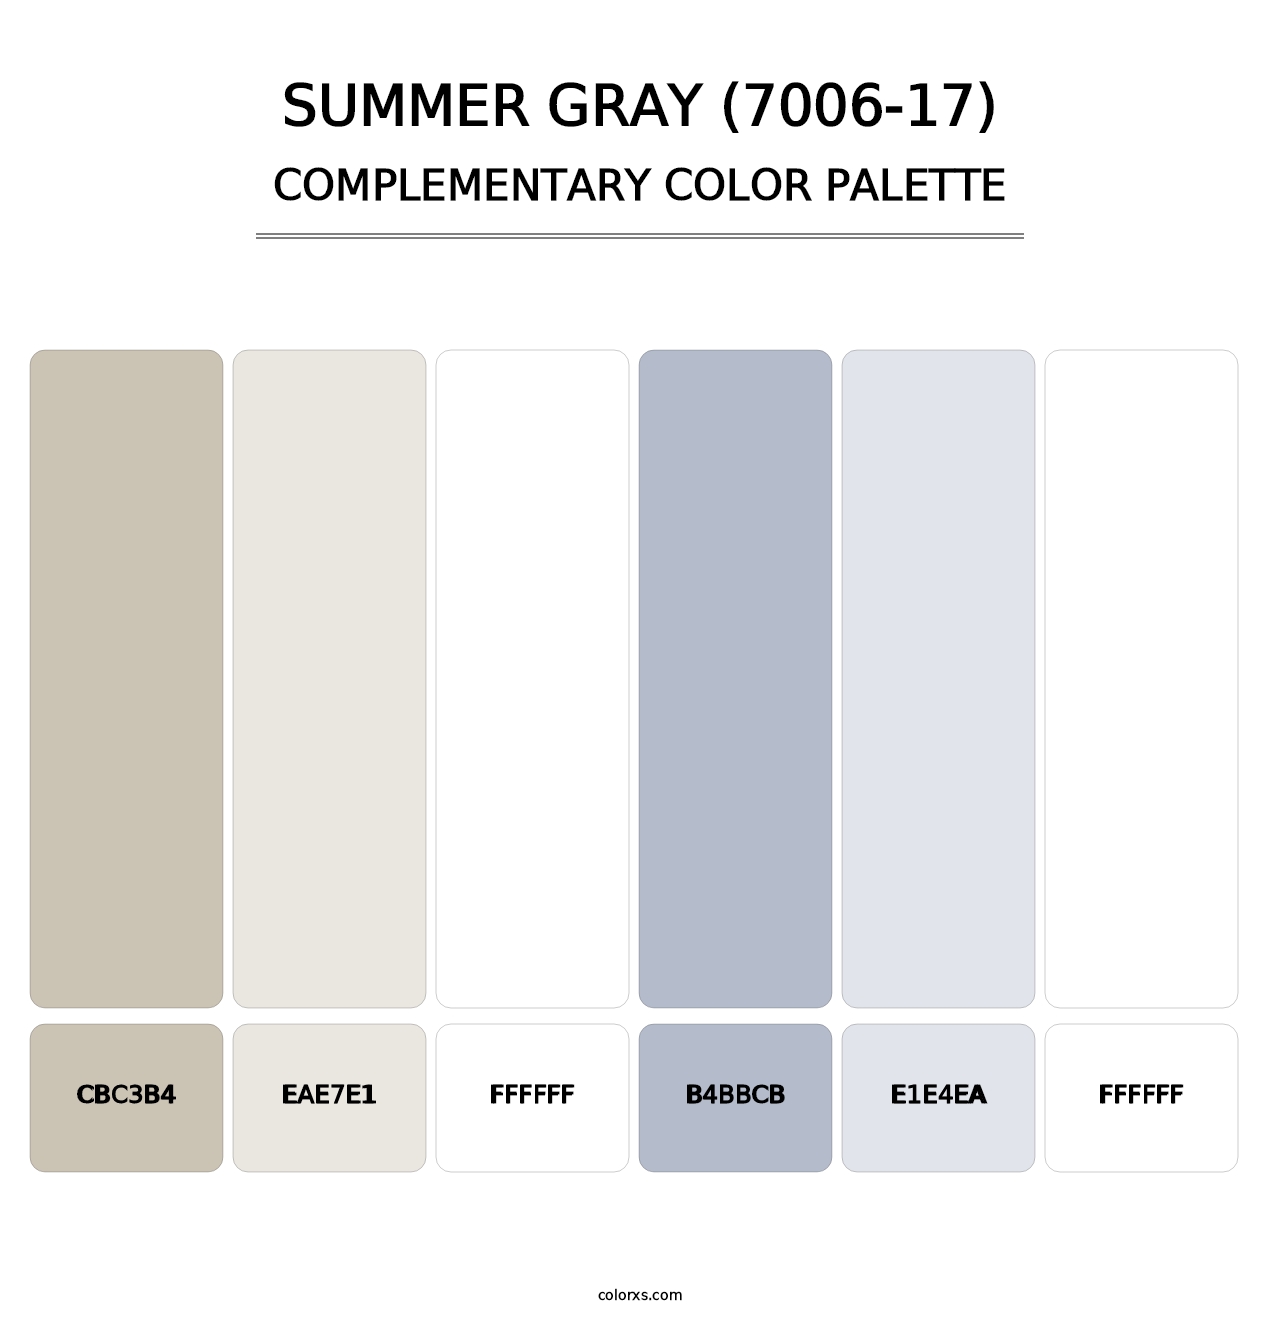 Summer Gray (7006-17) - Complementary Color Palette